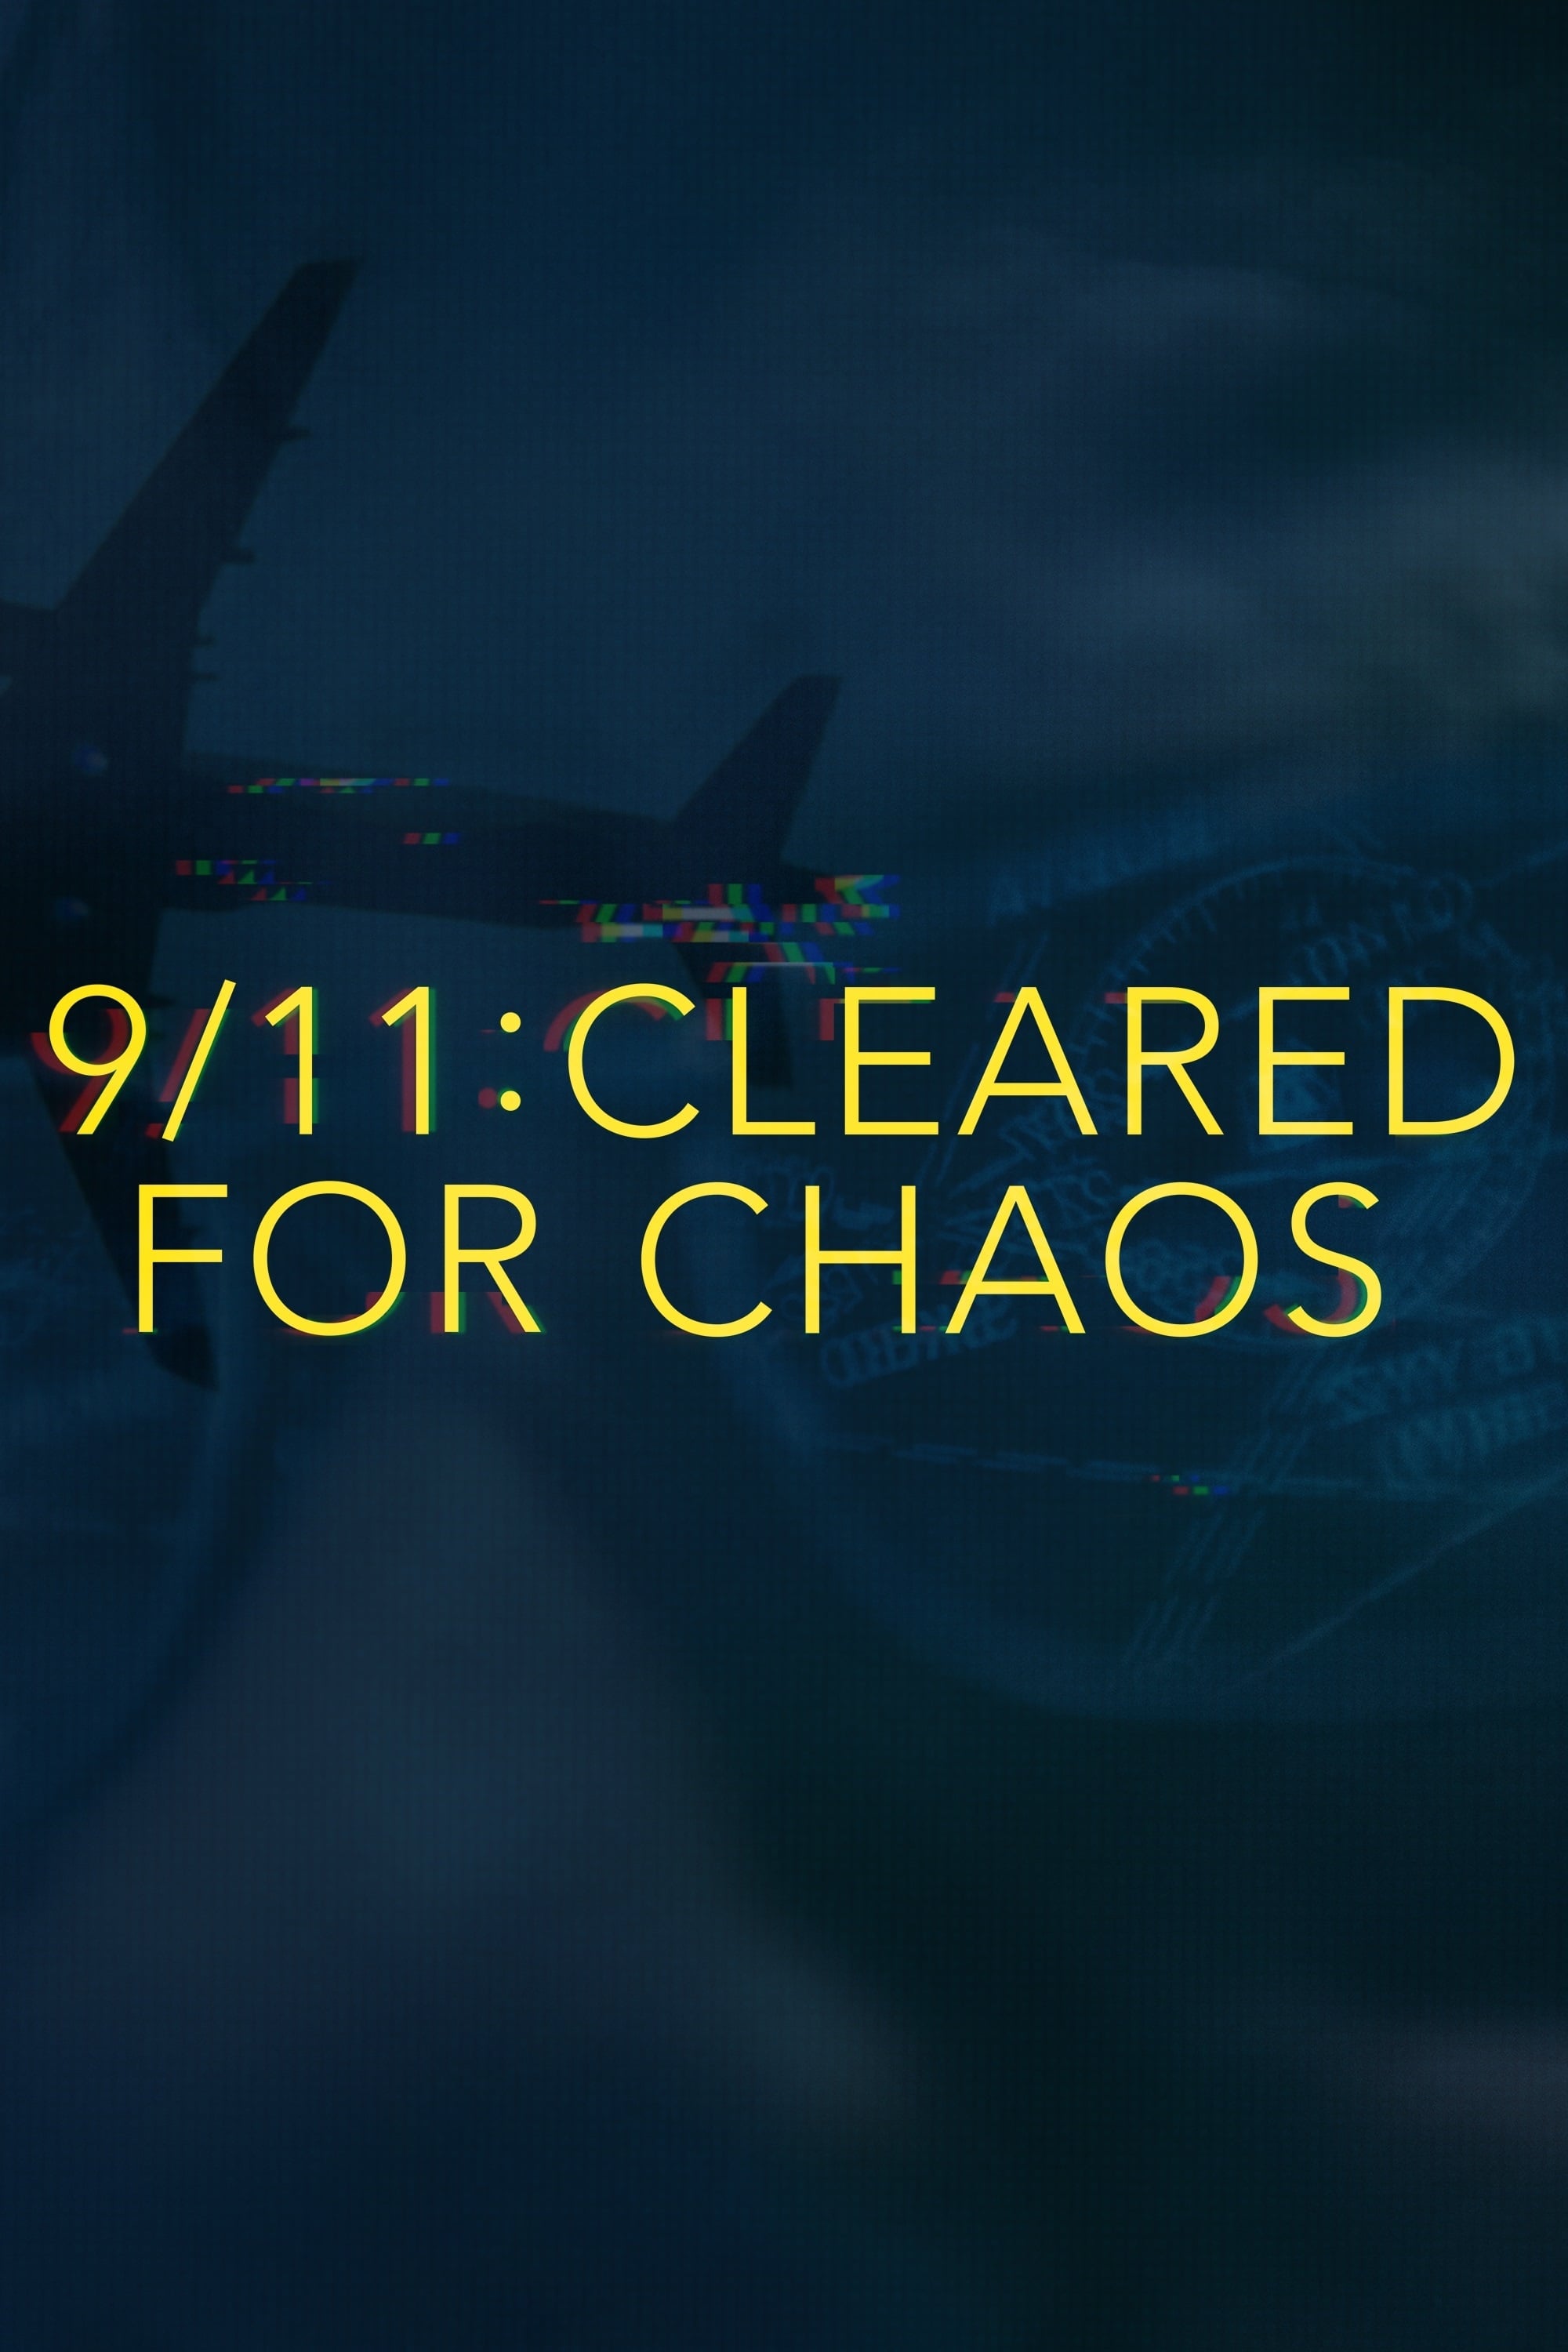 9/11: Cleared for Chaos